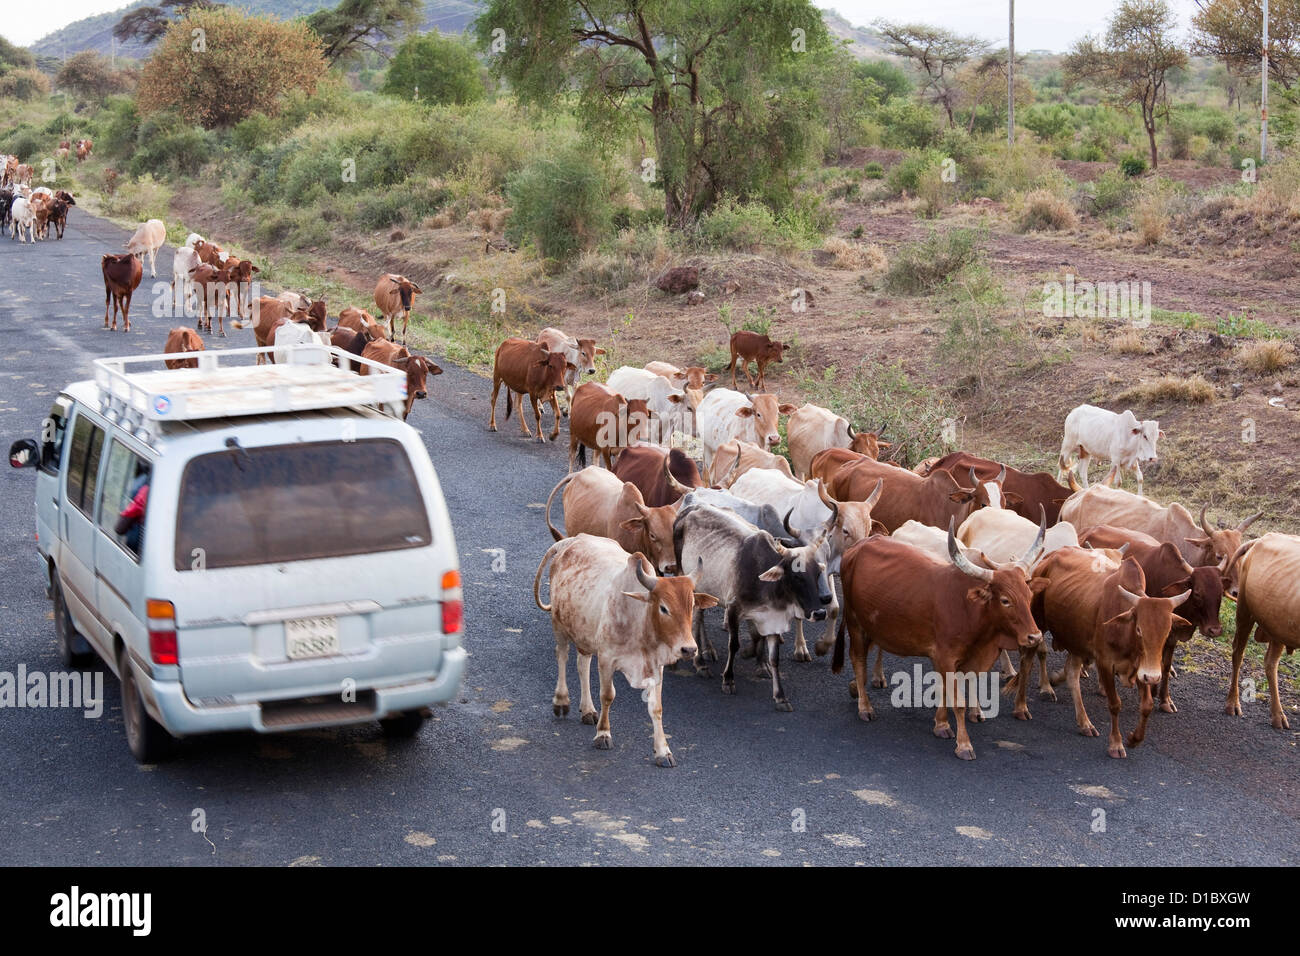 Herd of cattle on country road in rift valley. Beef is very popular in Ethiopia. Africa, Ethiopia Stock Photo